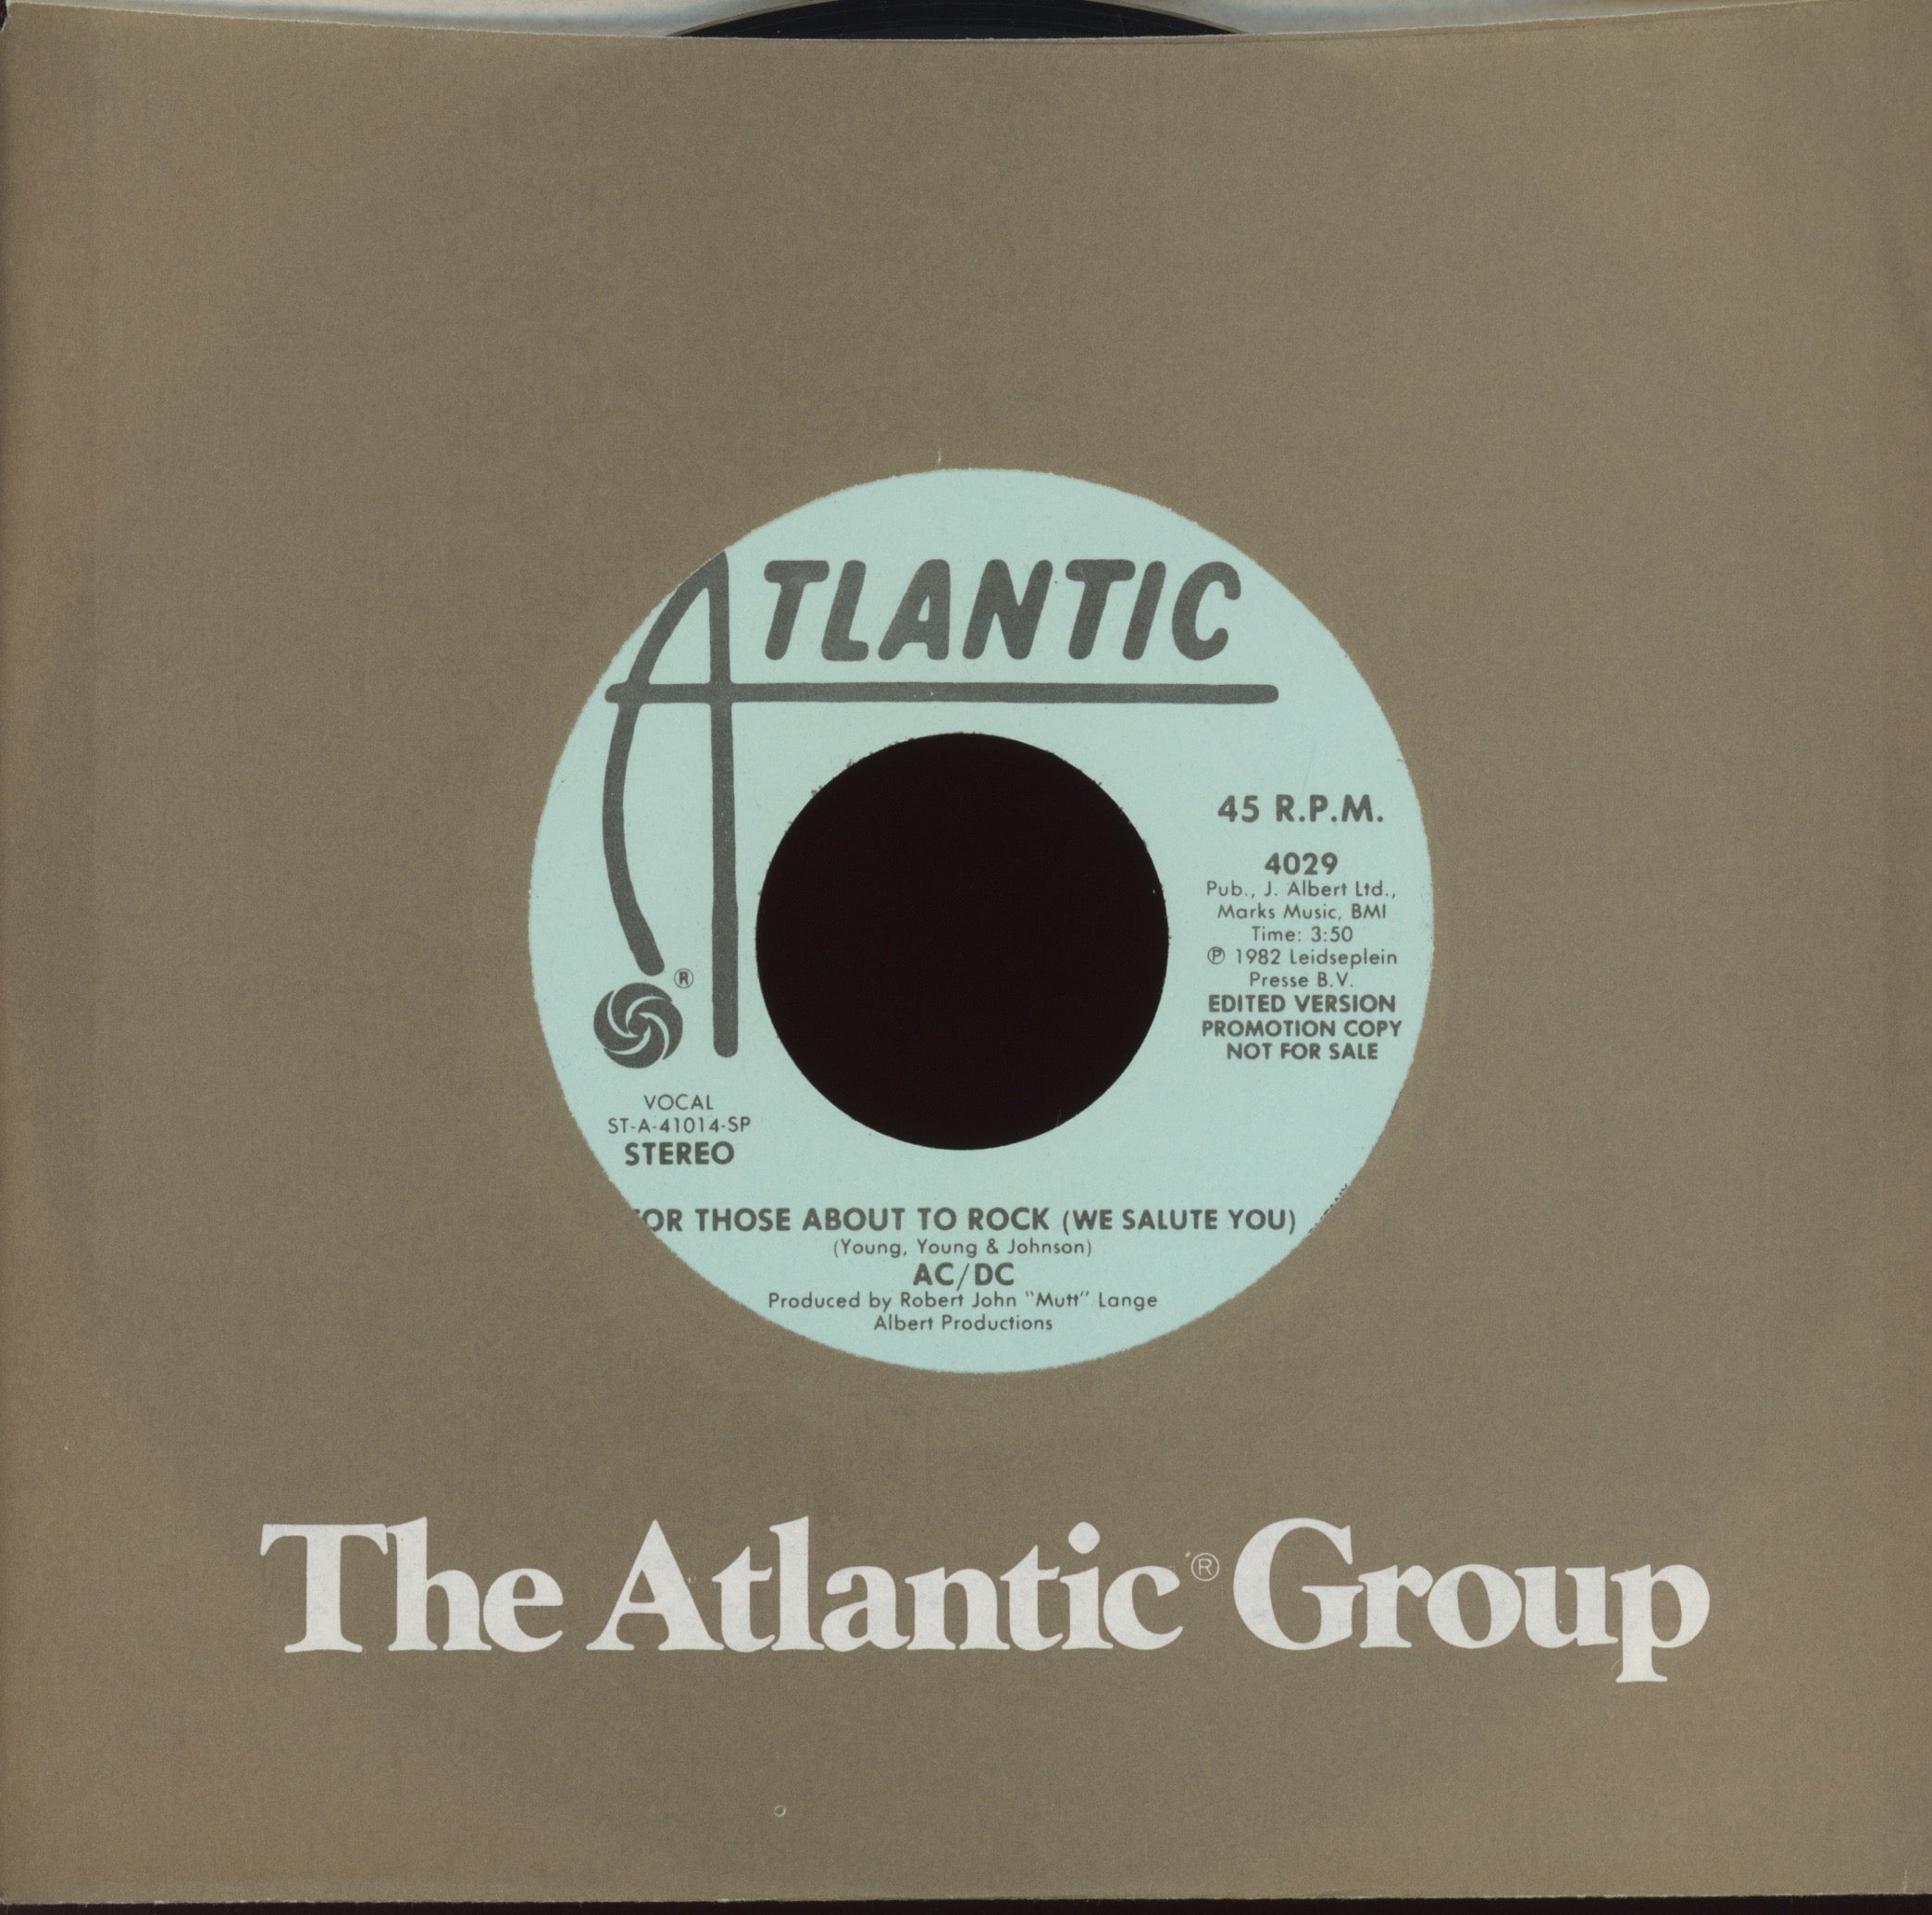 AC/DC - For Those About To Rock (We Salute You) on Atlantic Promo Rock 45